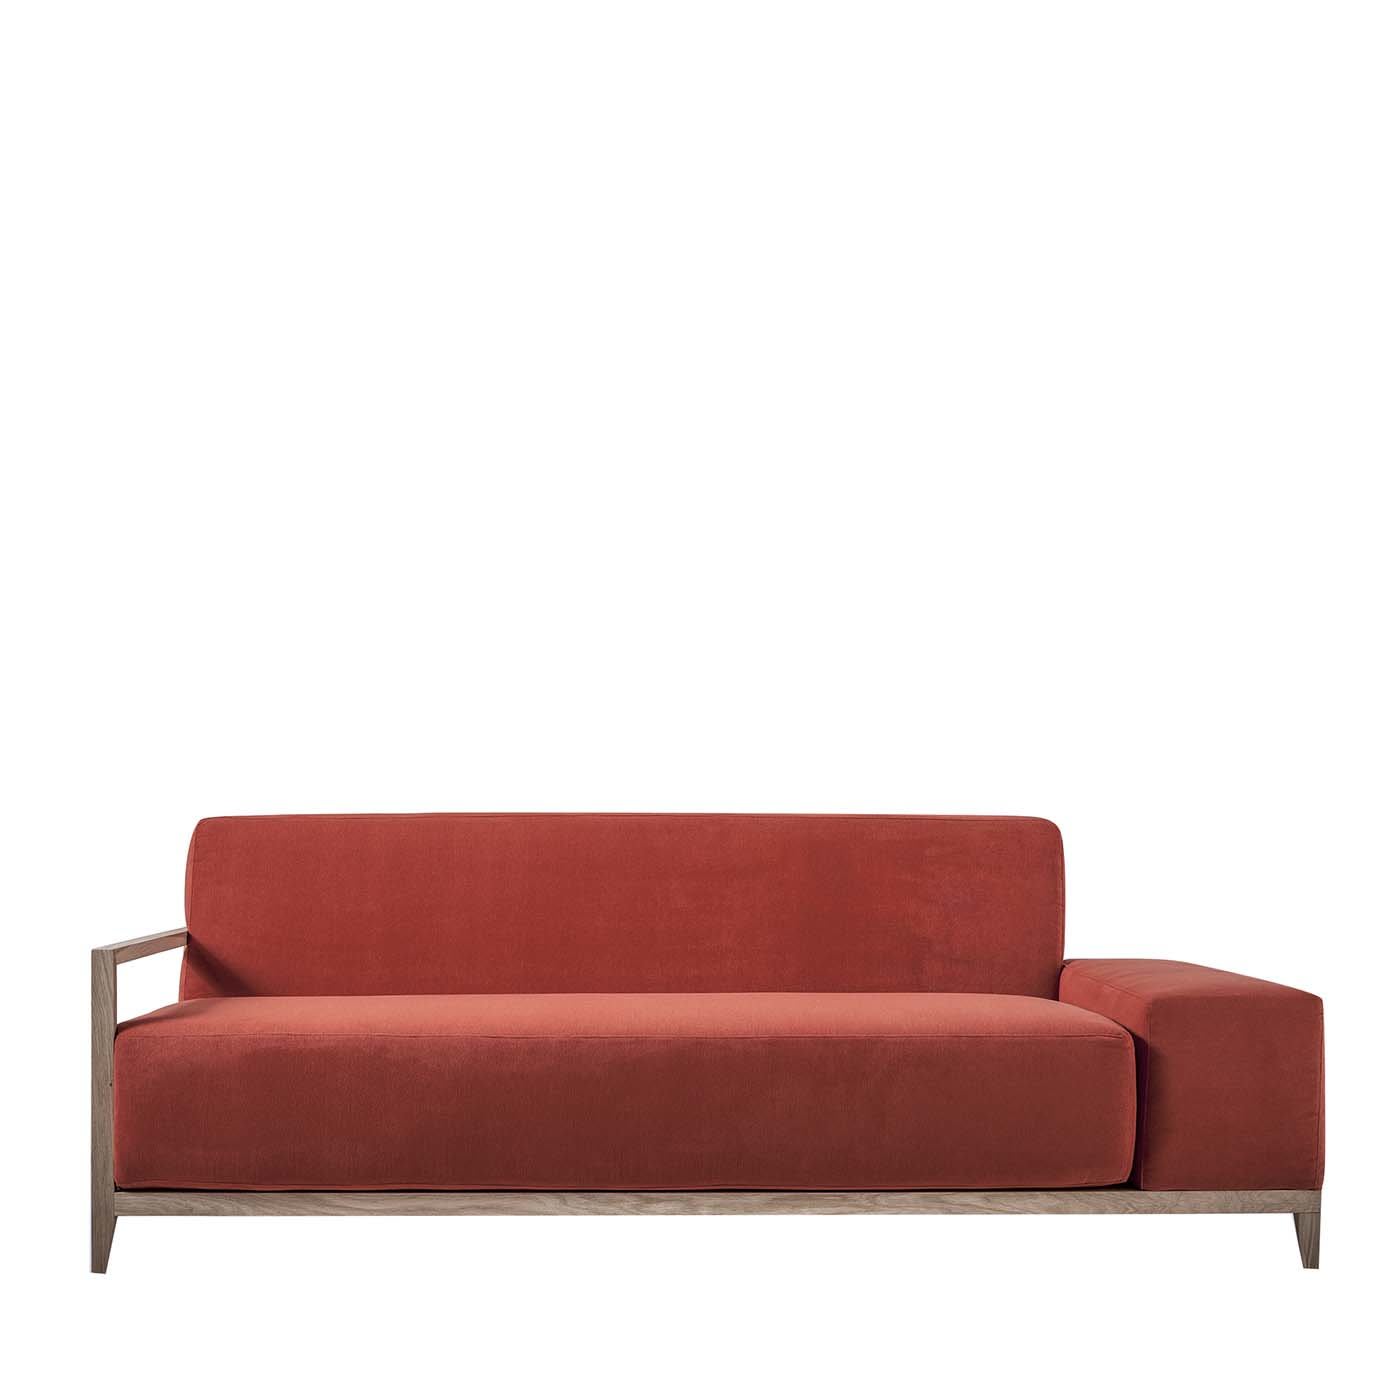 Suite Red Sofa - PG Collection